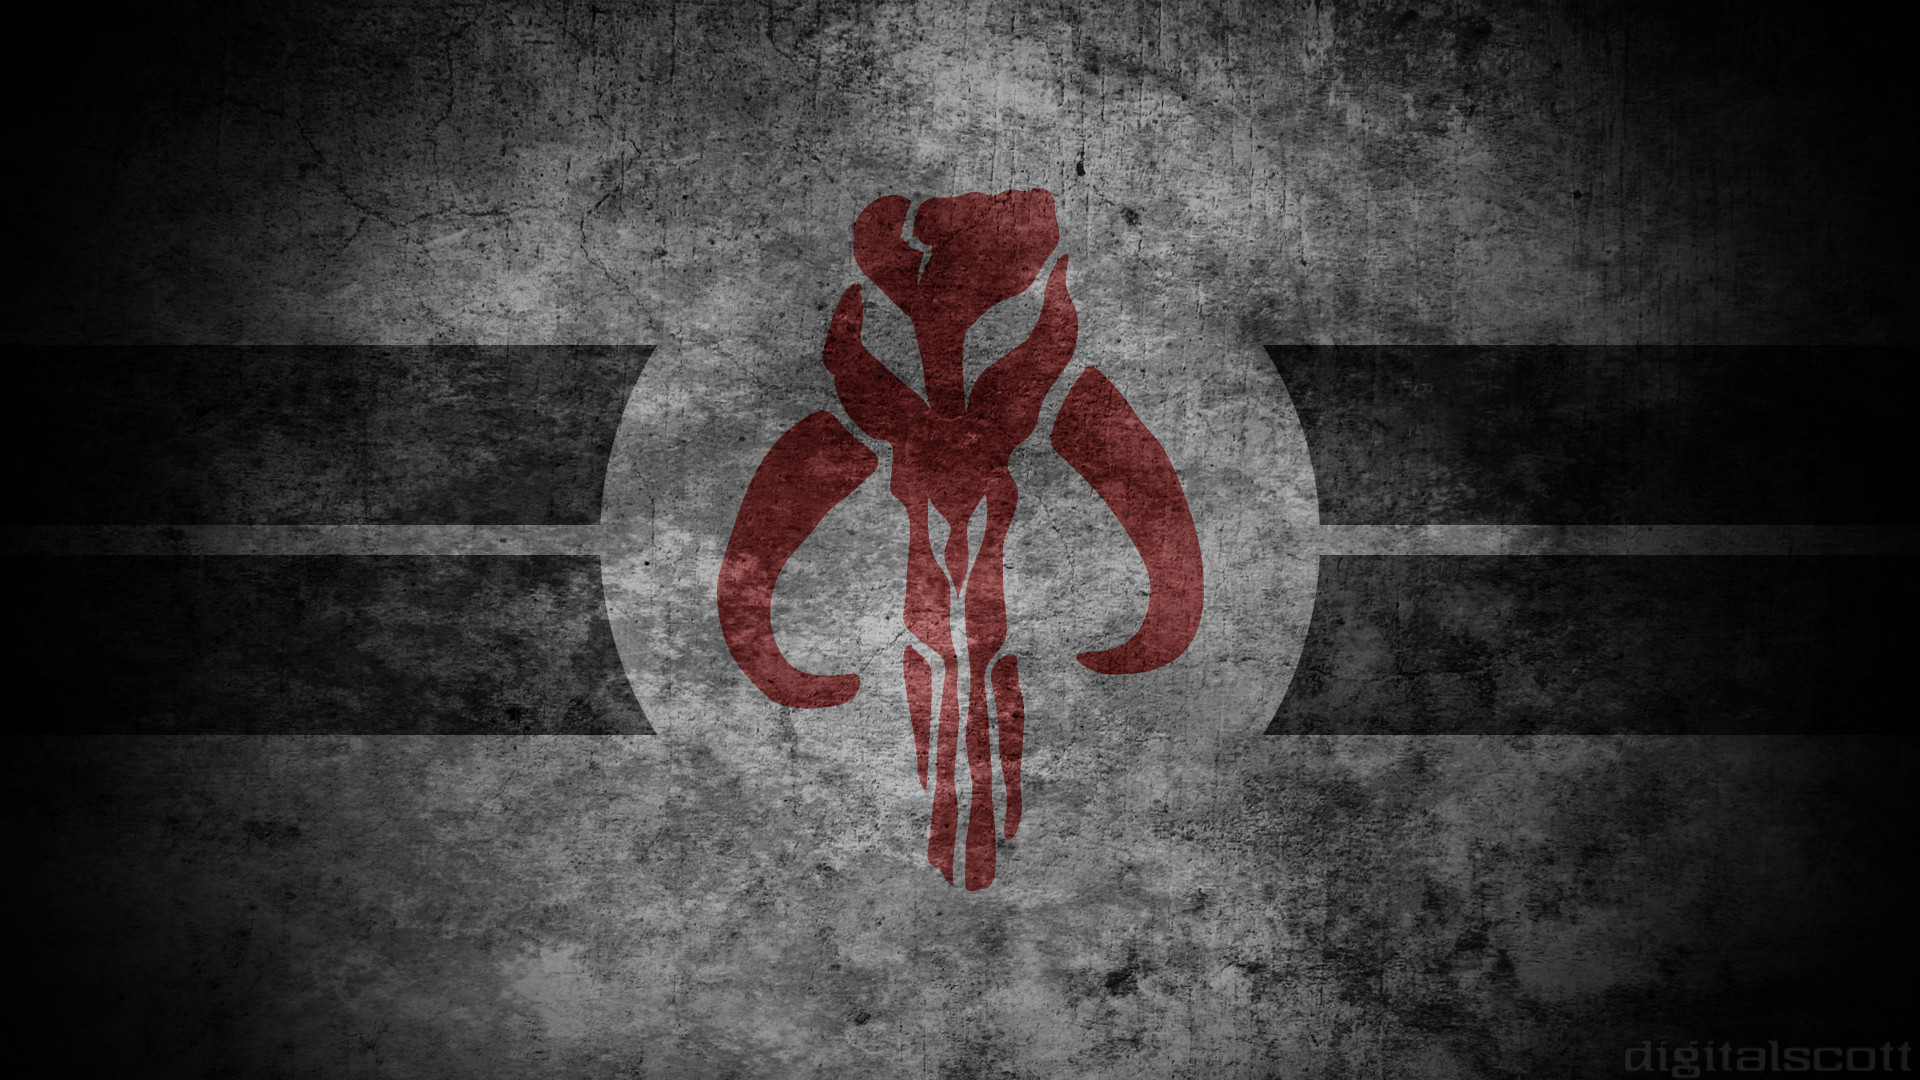 Mandalorian HD Mandalorian HD Images, Pictures, Wallpapers on NMgnCP